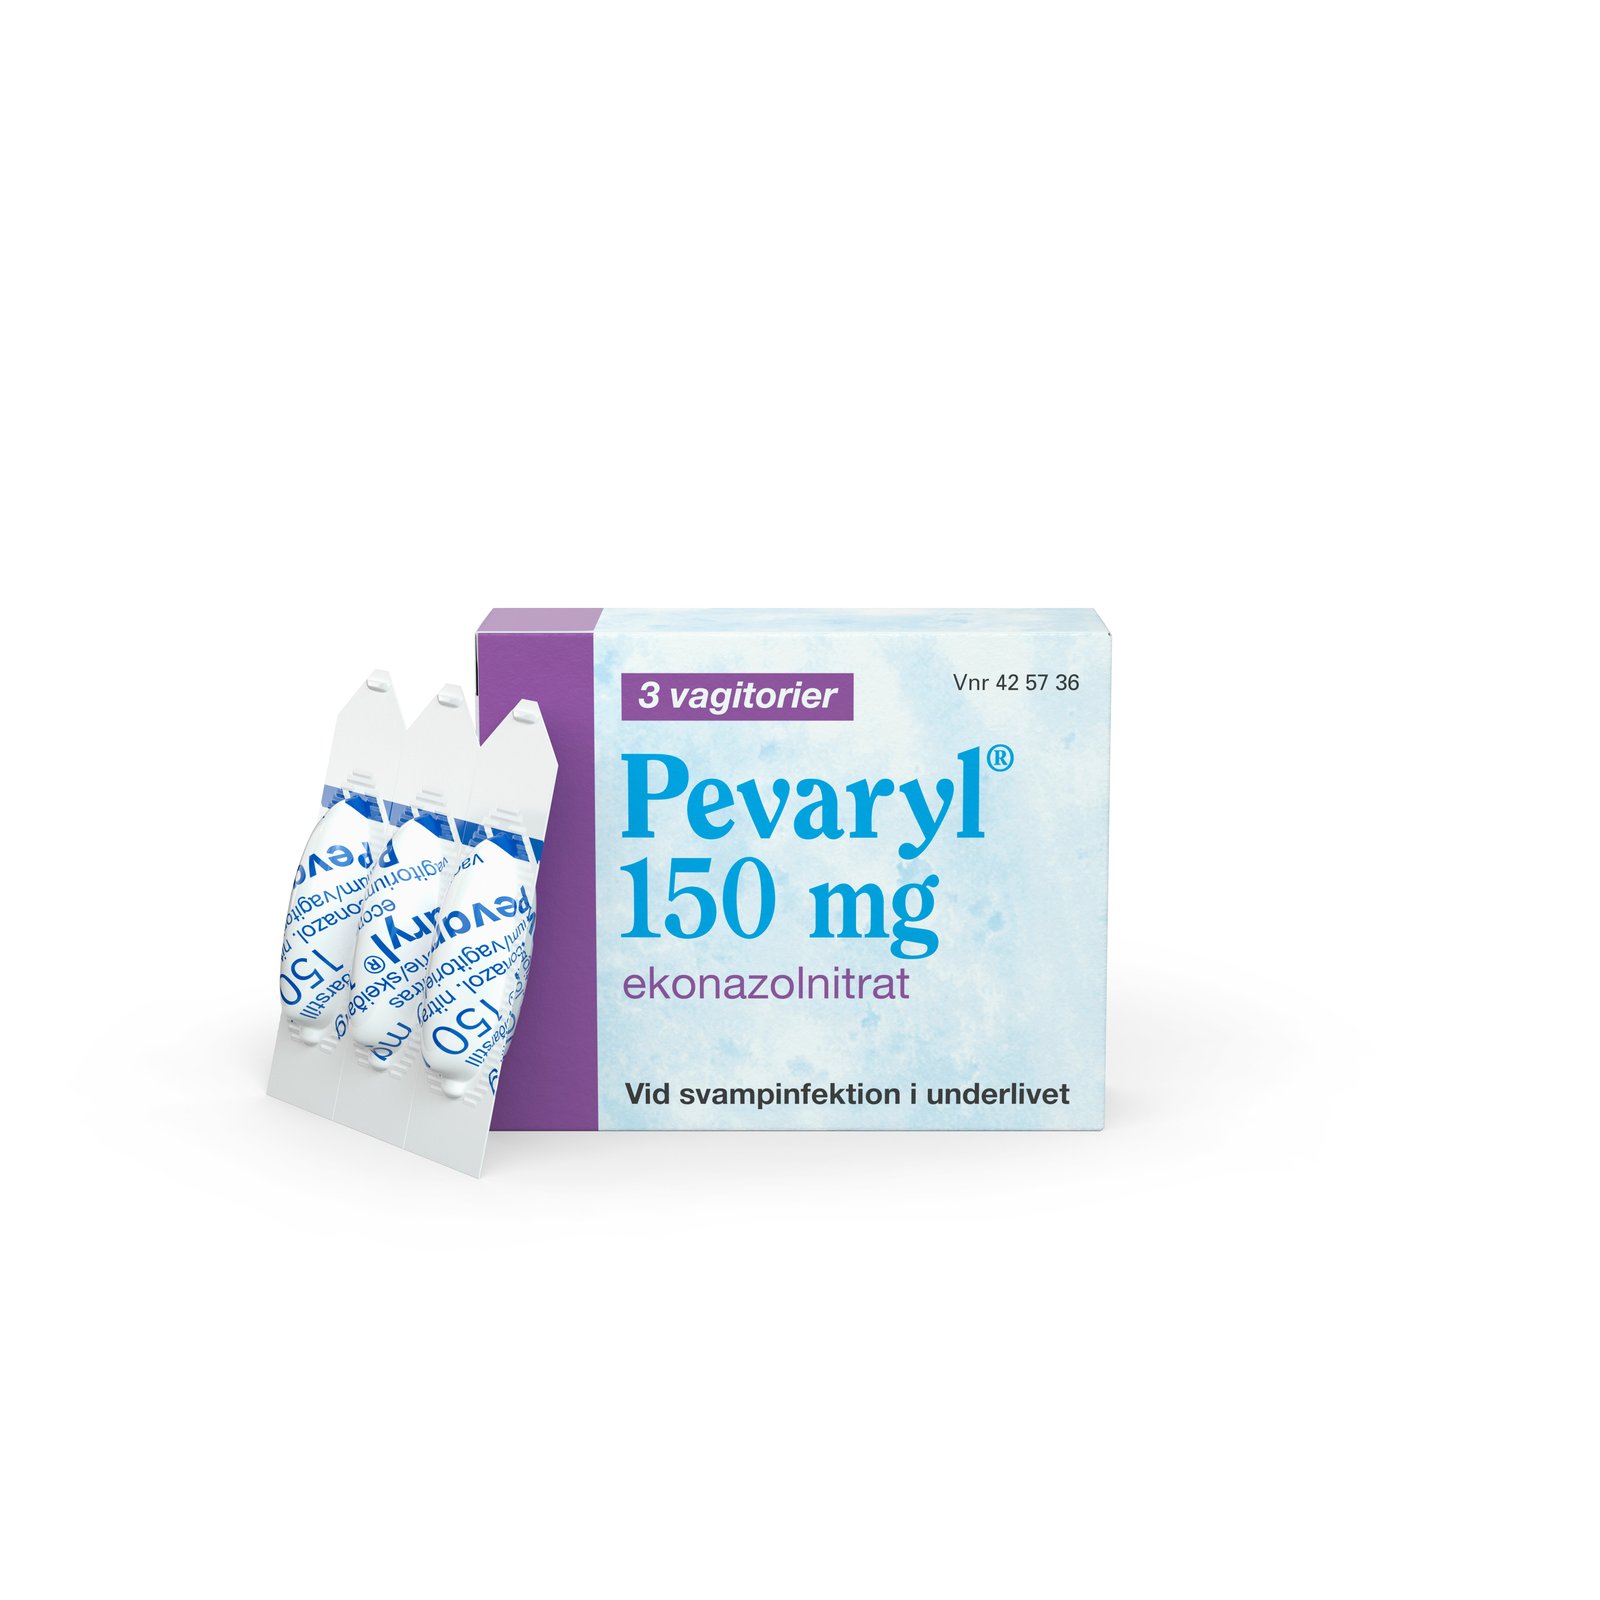 Pevaryl Vagitorier 150 mg 3 st